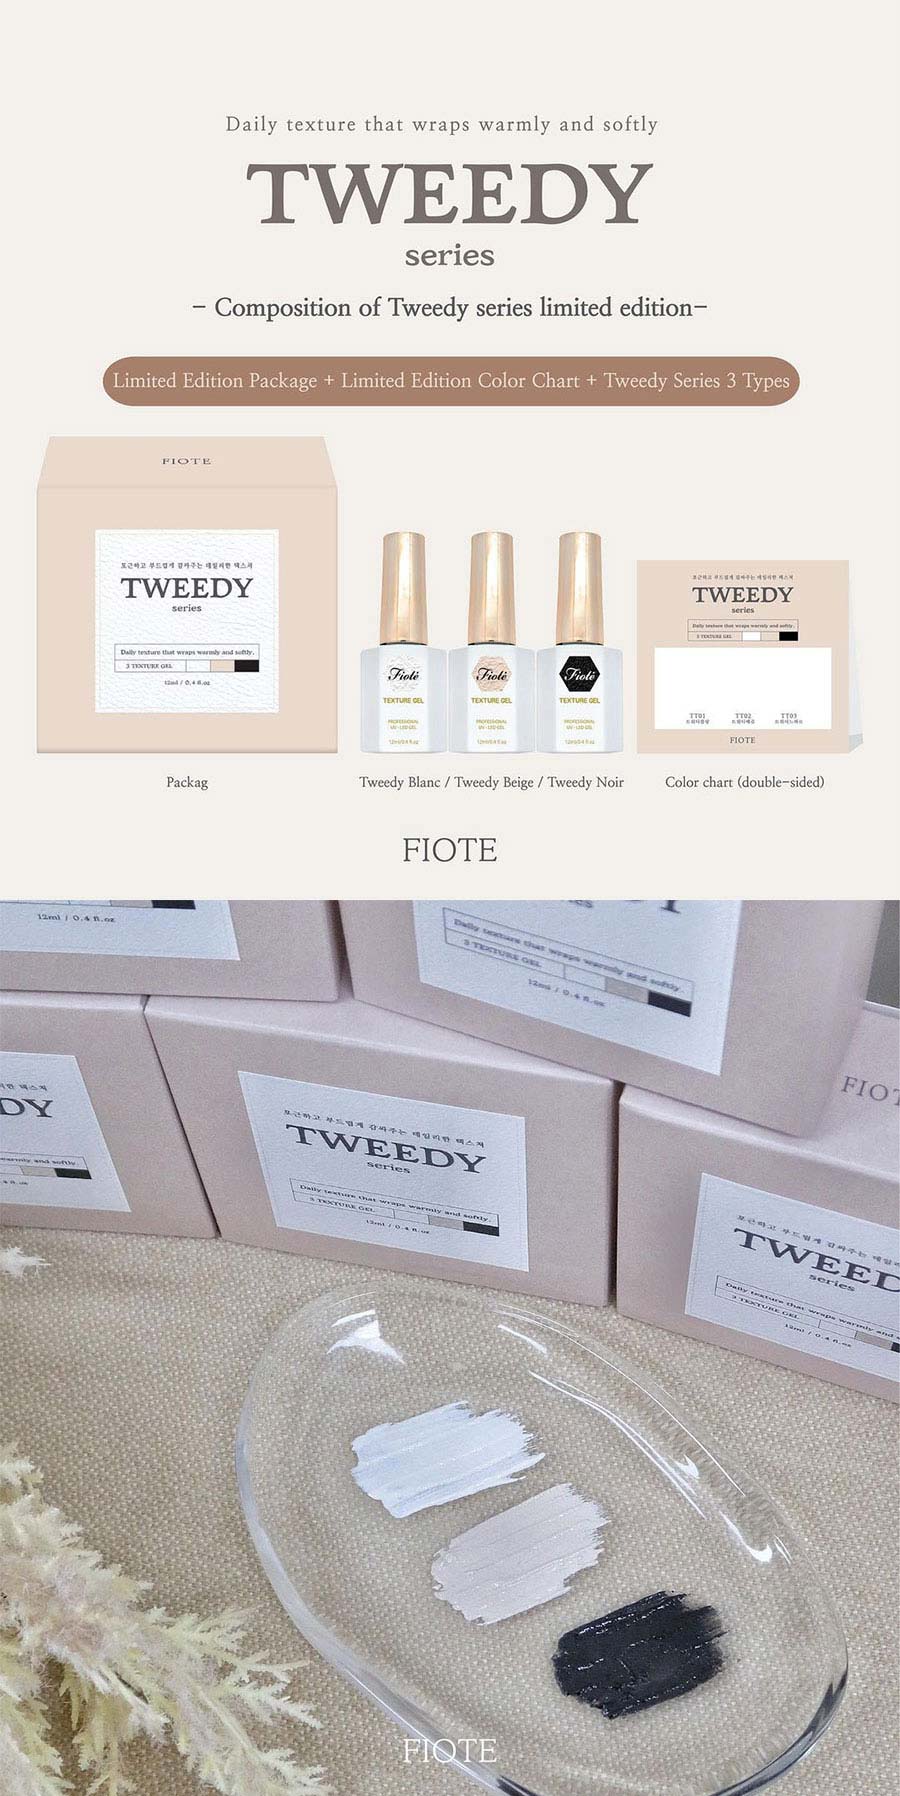 fiote tweedy collection